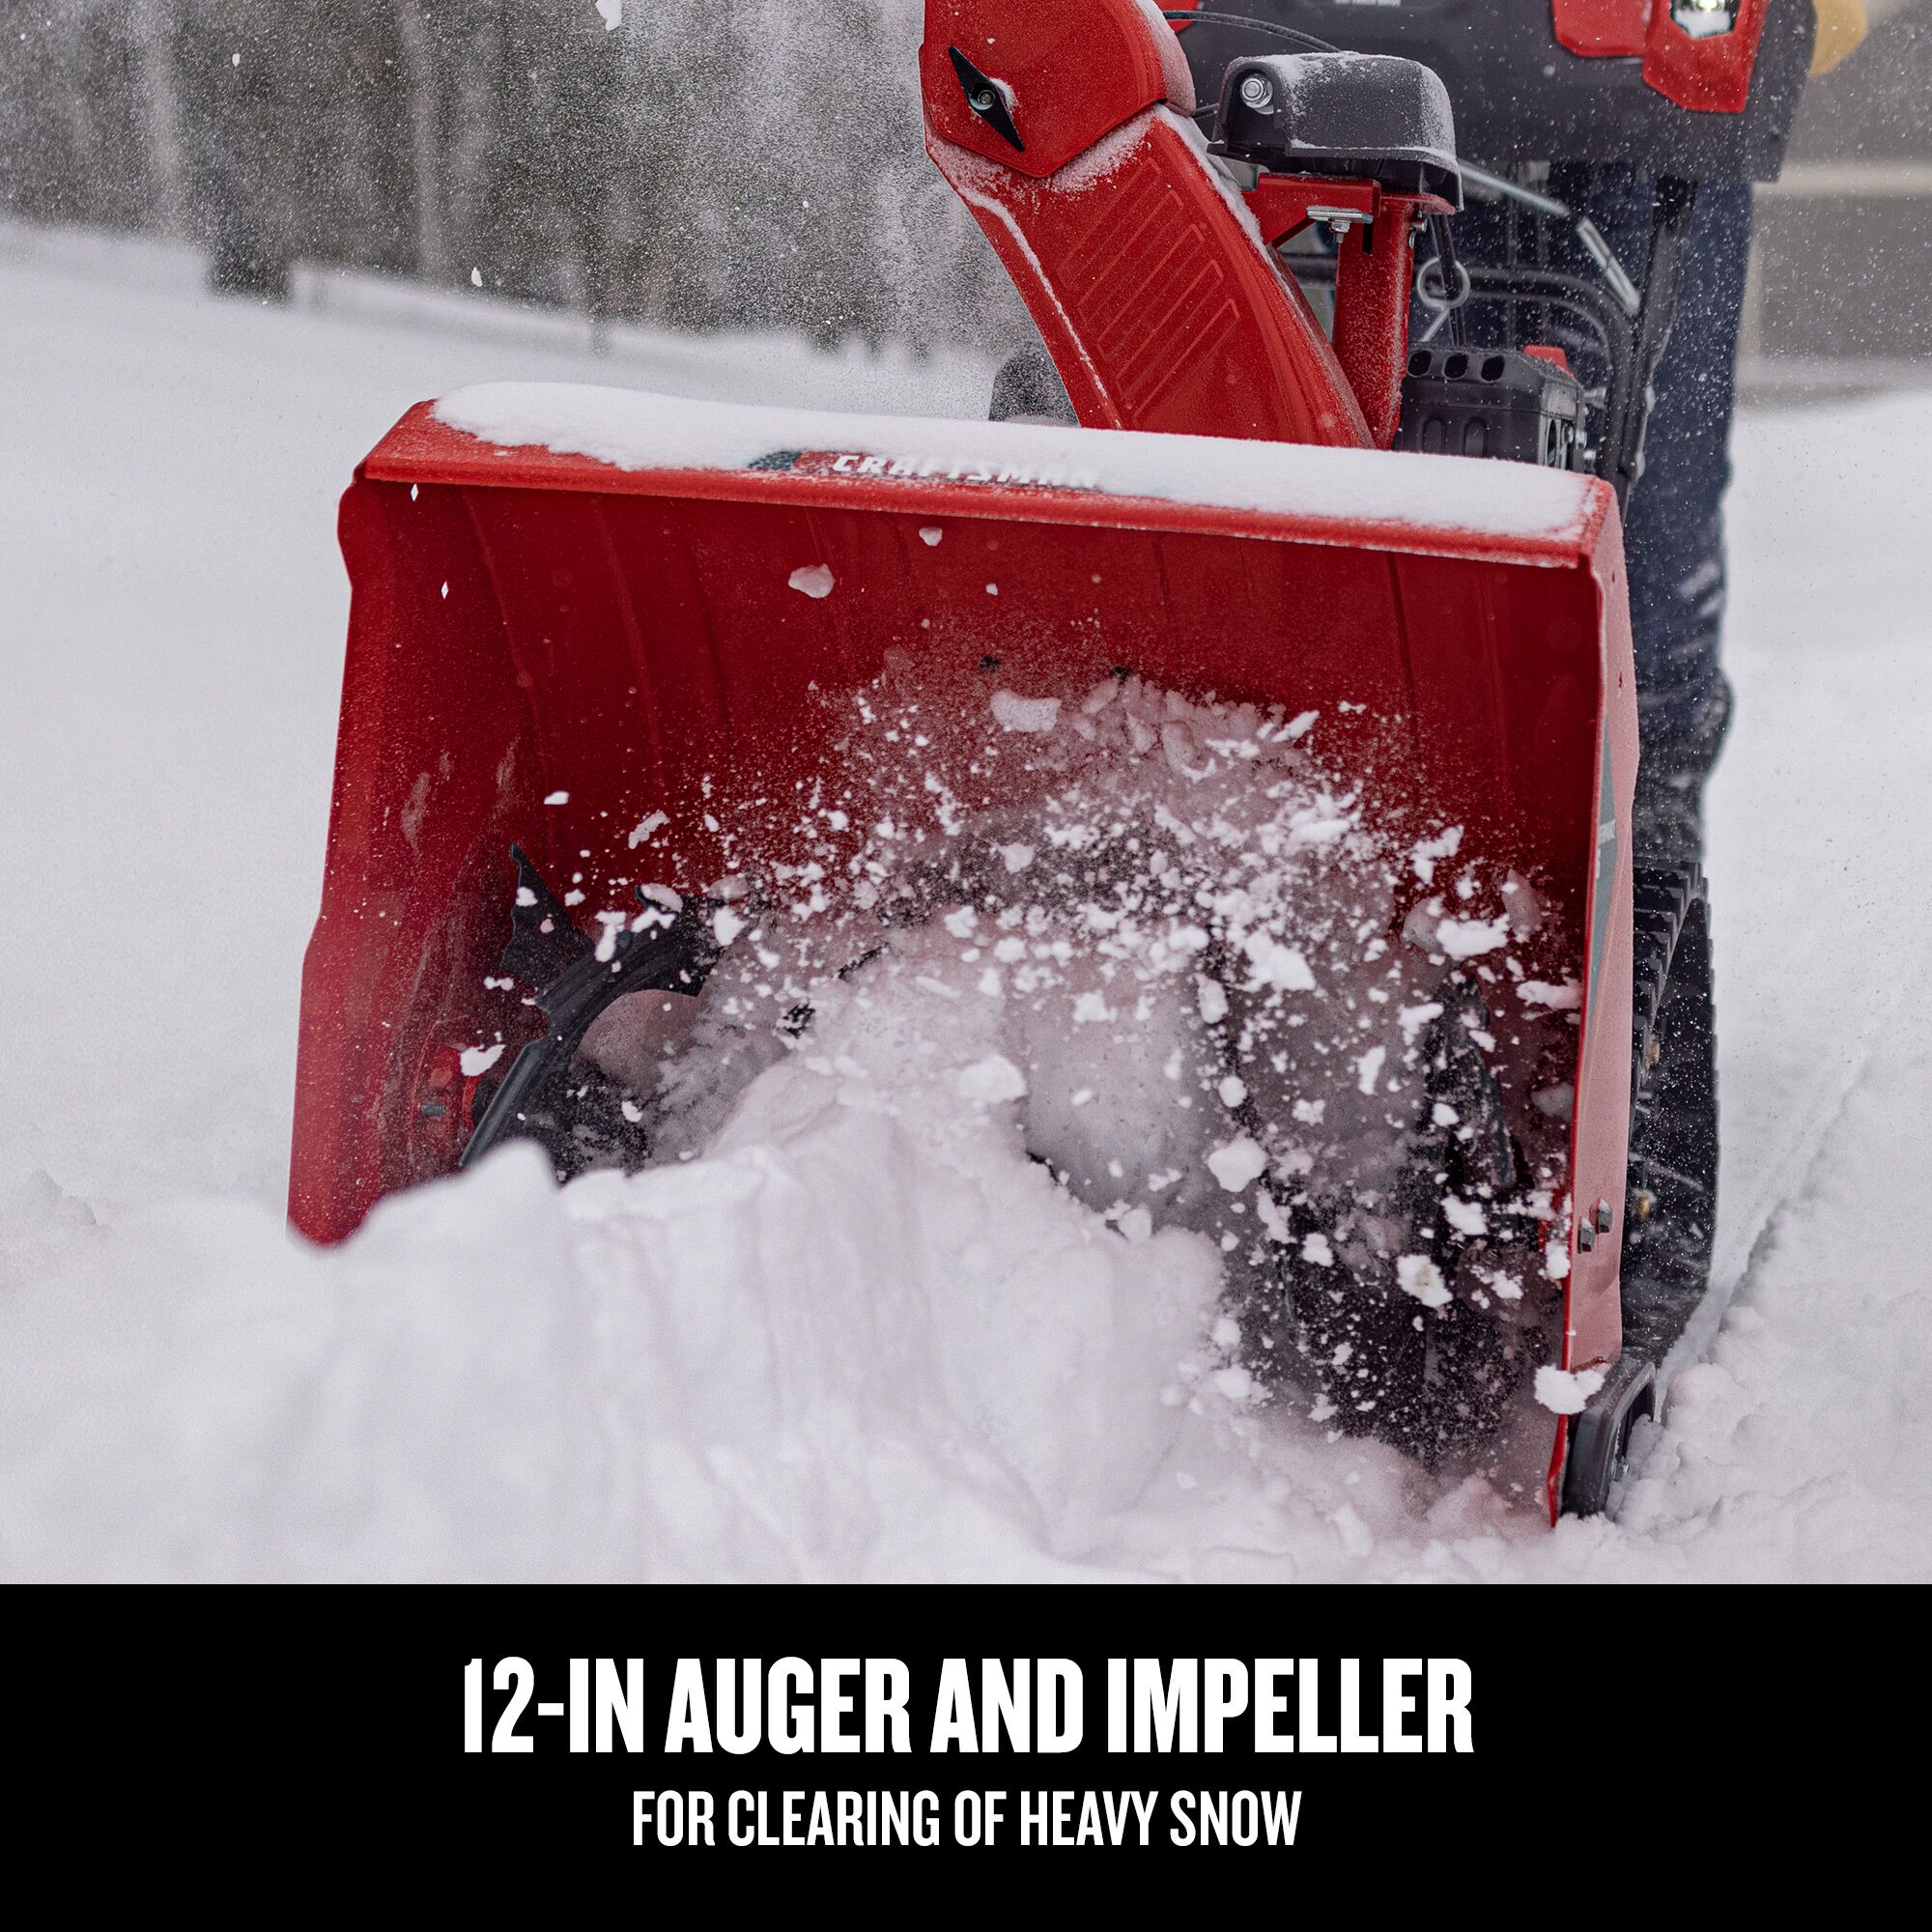 CRAFTSMAN 26-in. 243-cc Two-Stage Gas Snow Blower focused in on auger and impeller